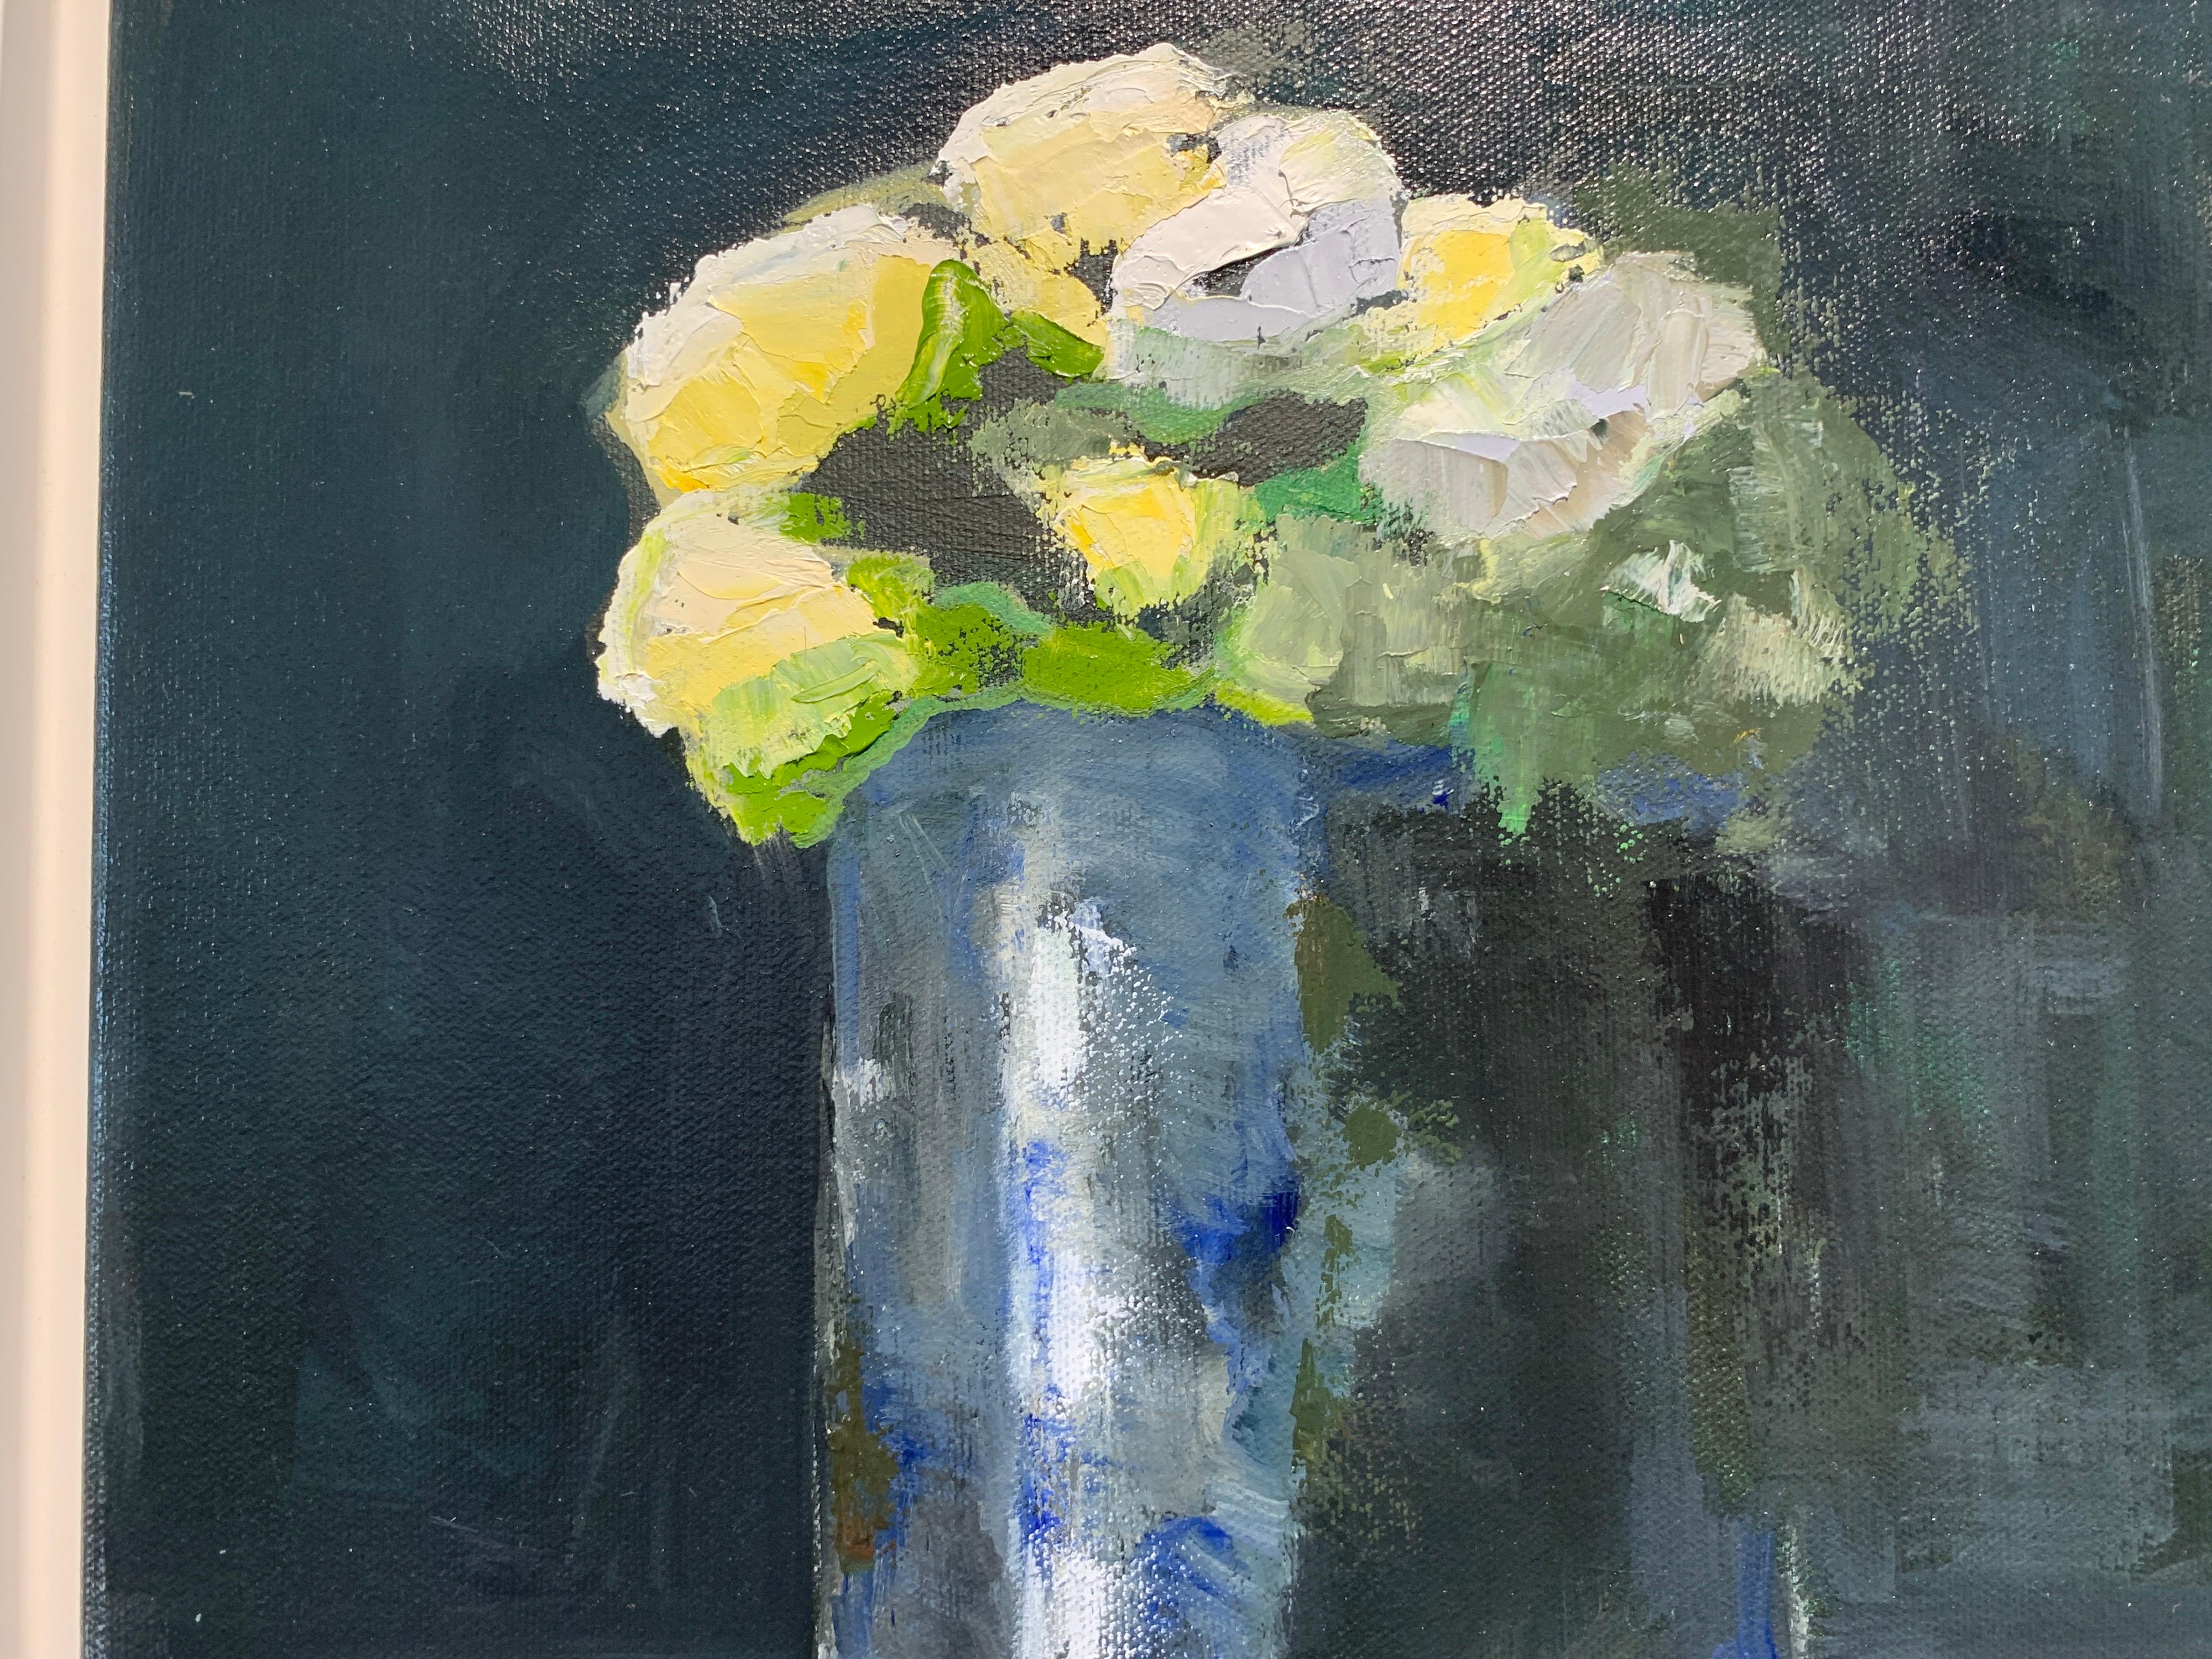 Mums by Anne Harney, Contemporary Floral Still Life Painting 4